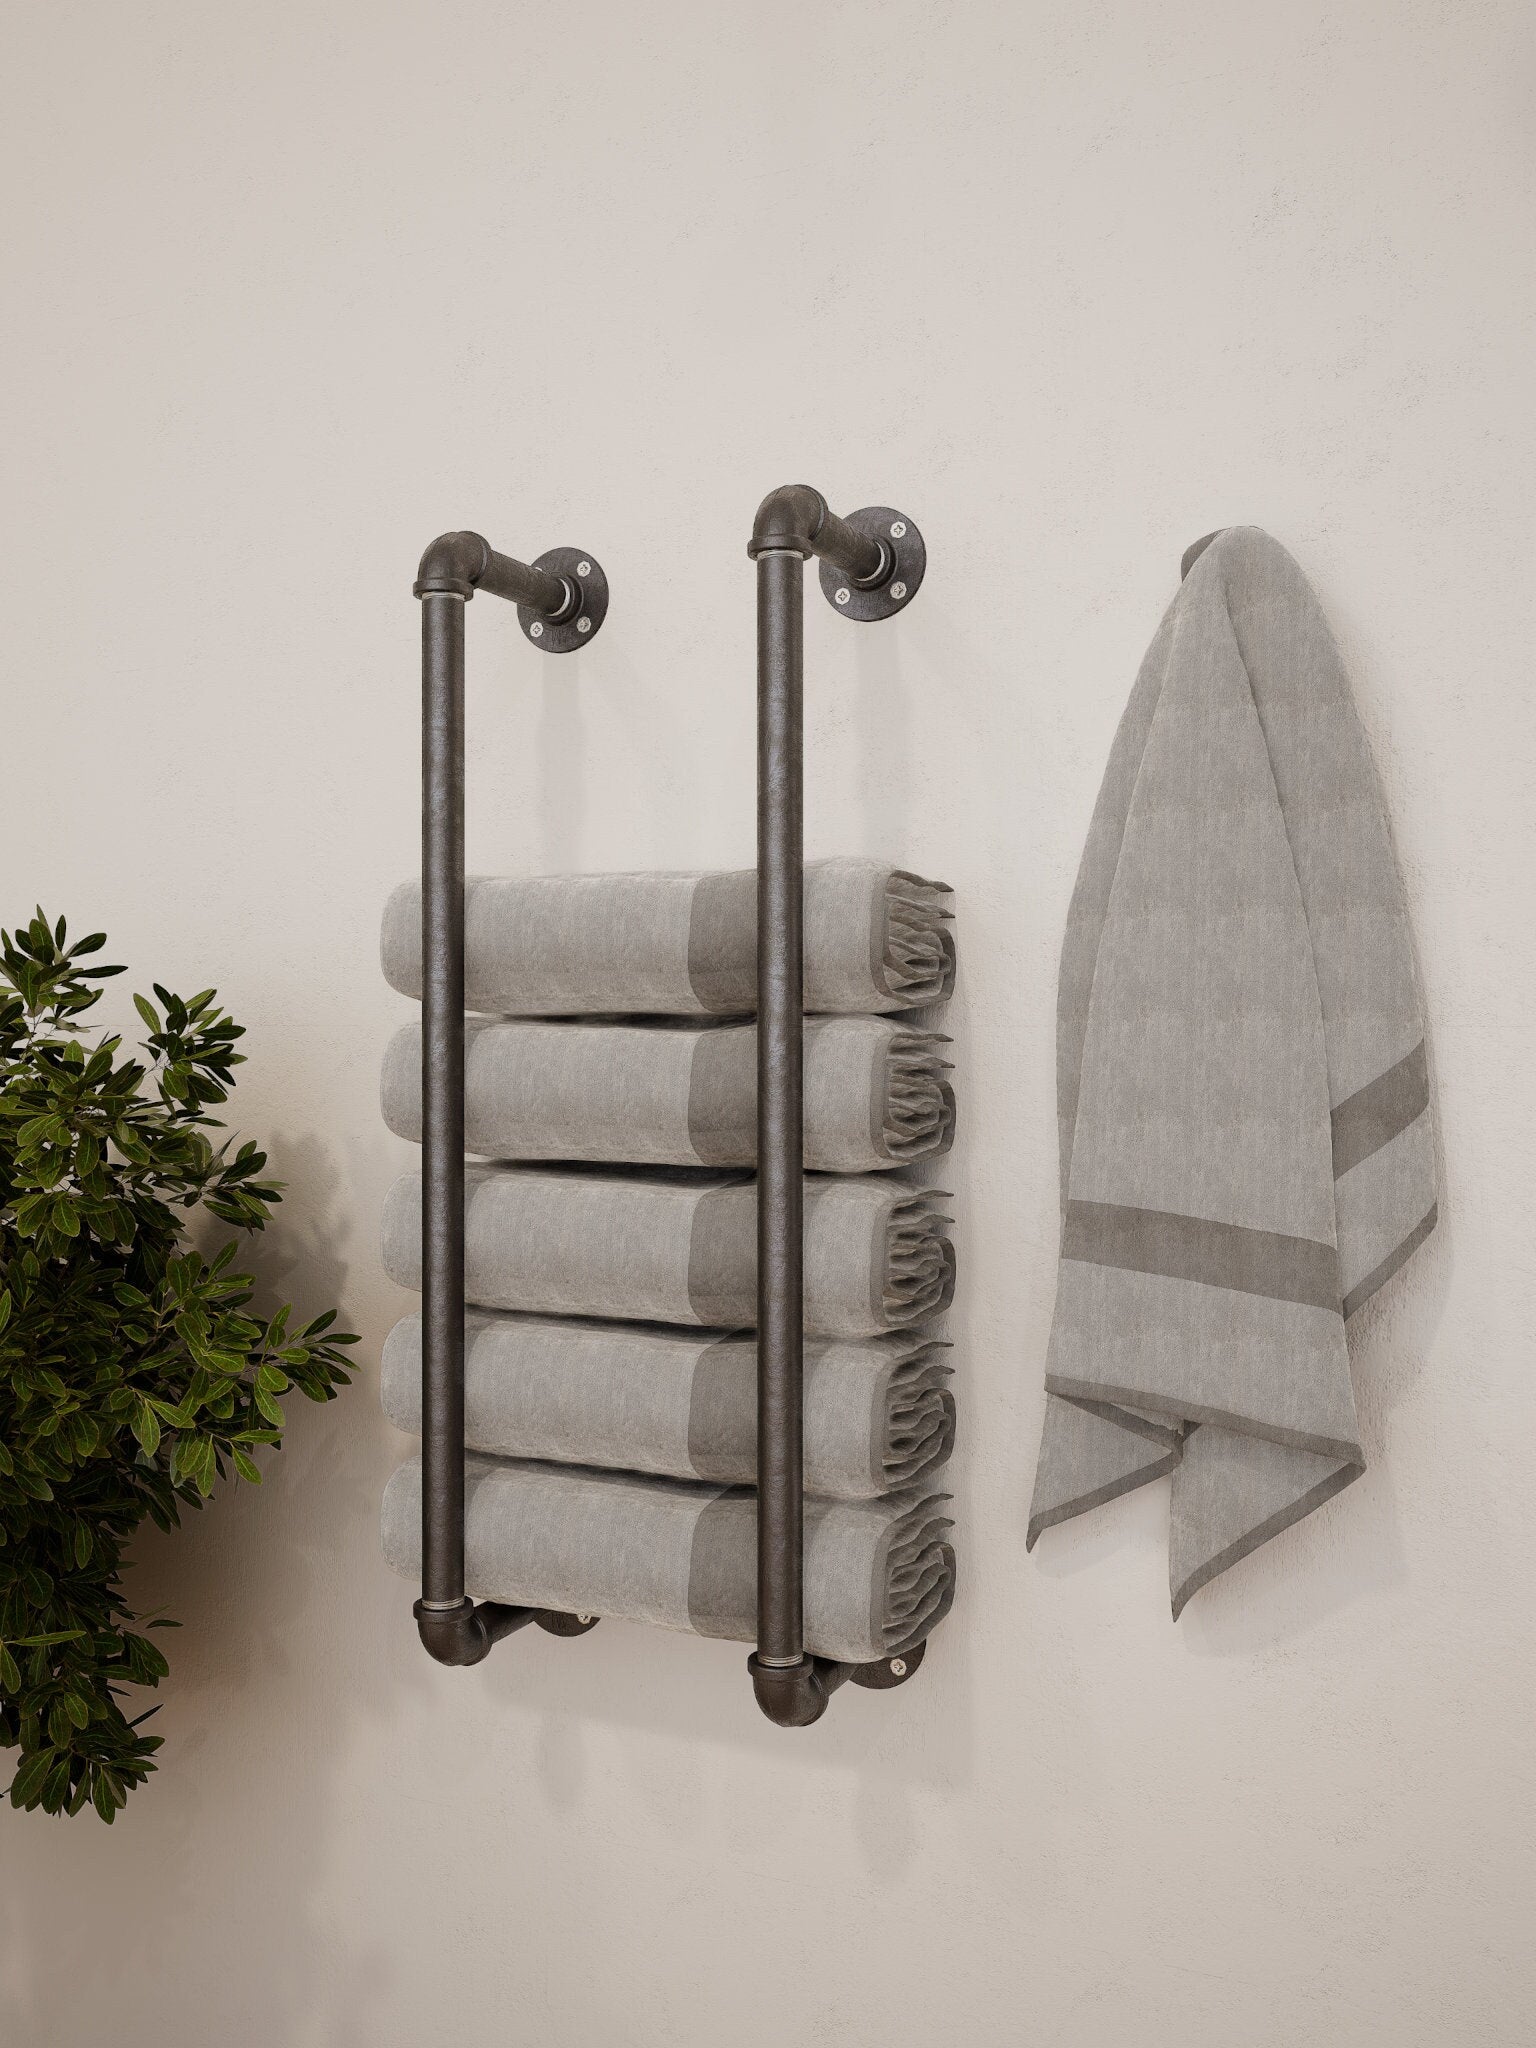 Self-adhesive Bathroom Towel Rack Holder Without Drilling, Wall